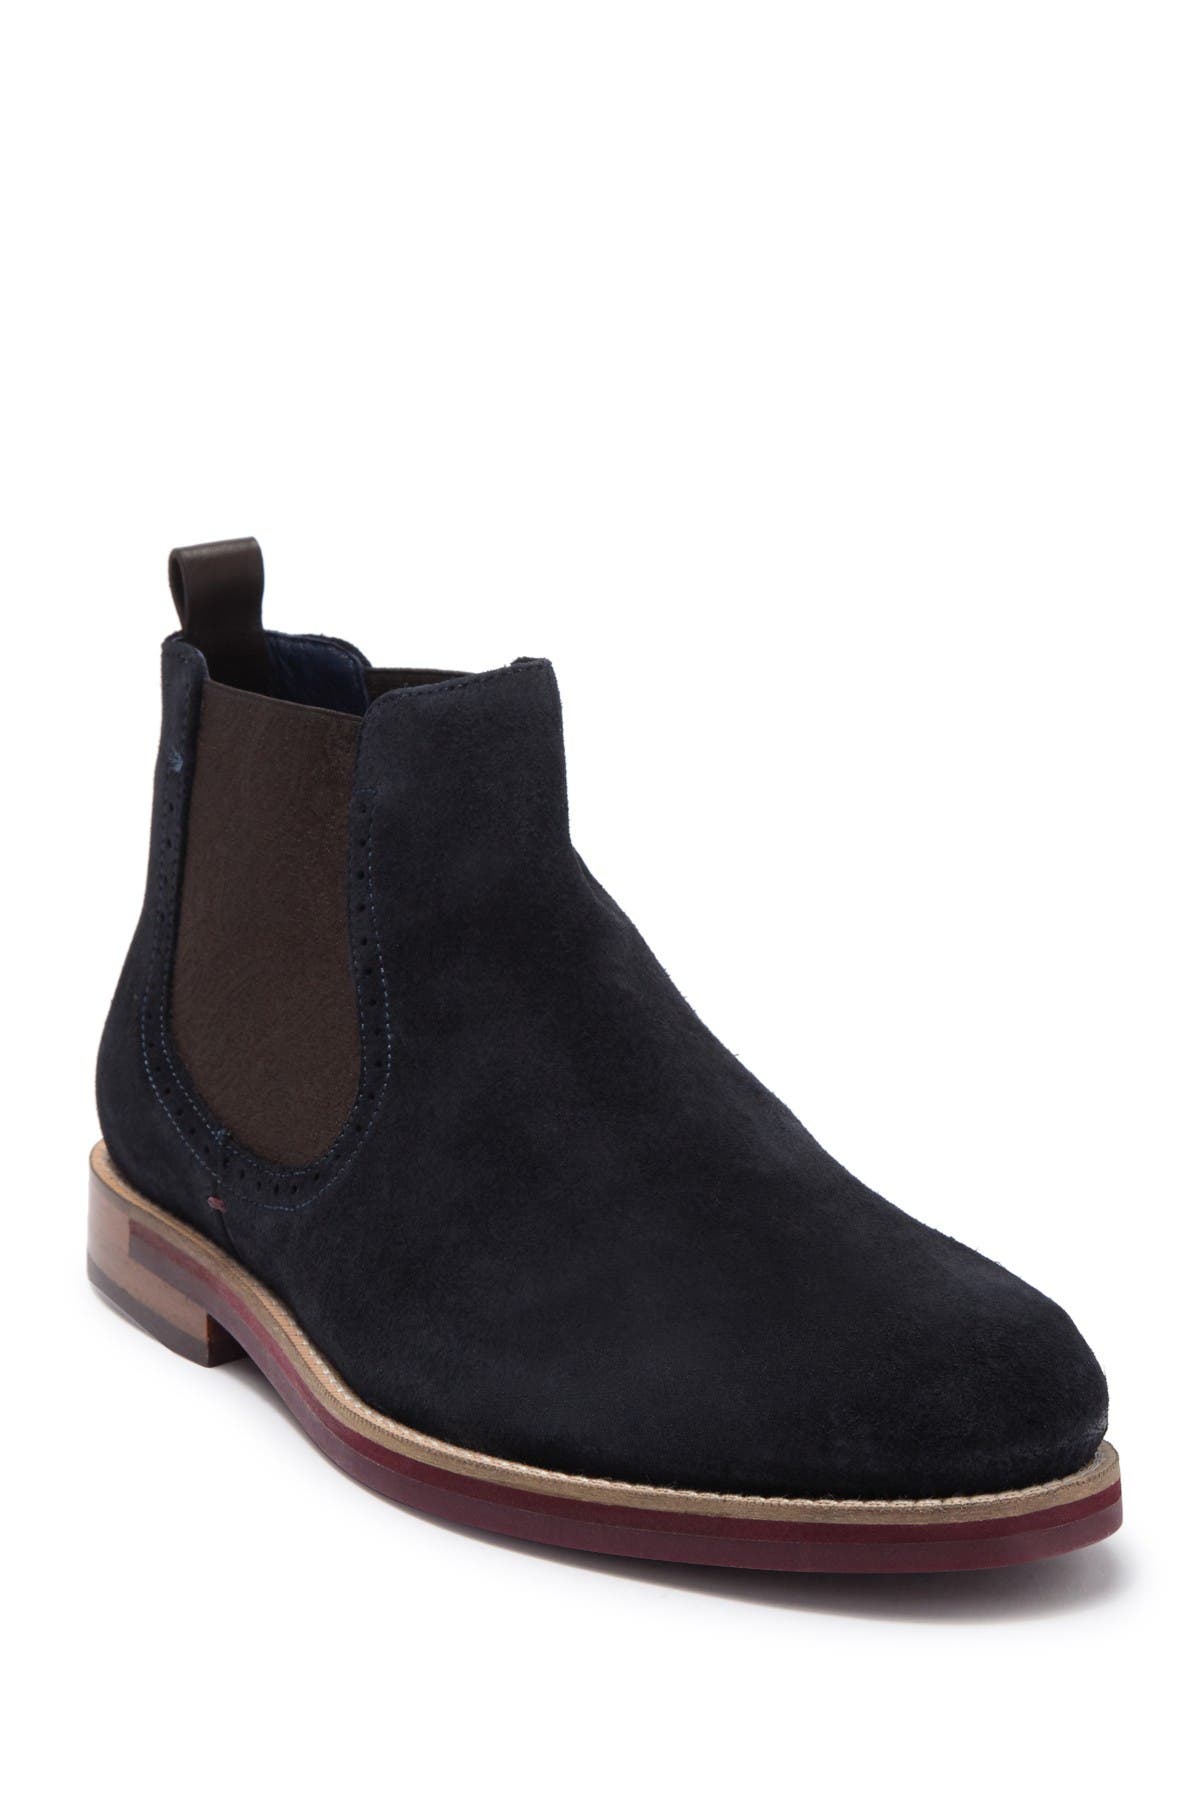 ted baker suede boots